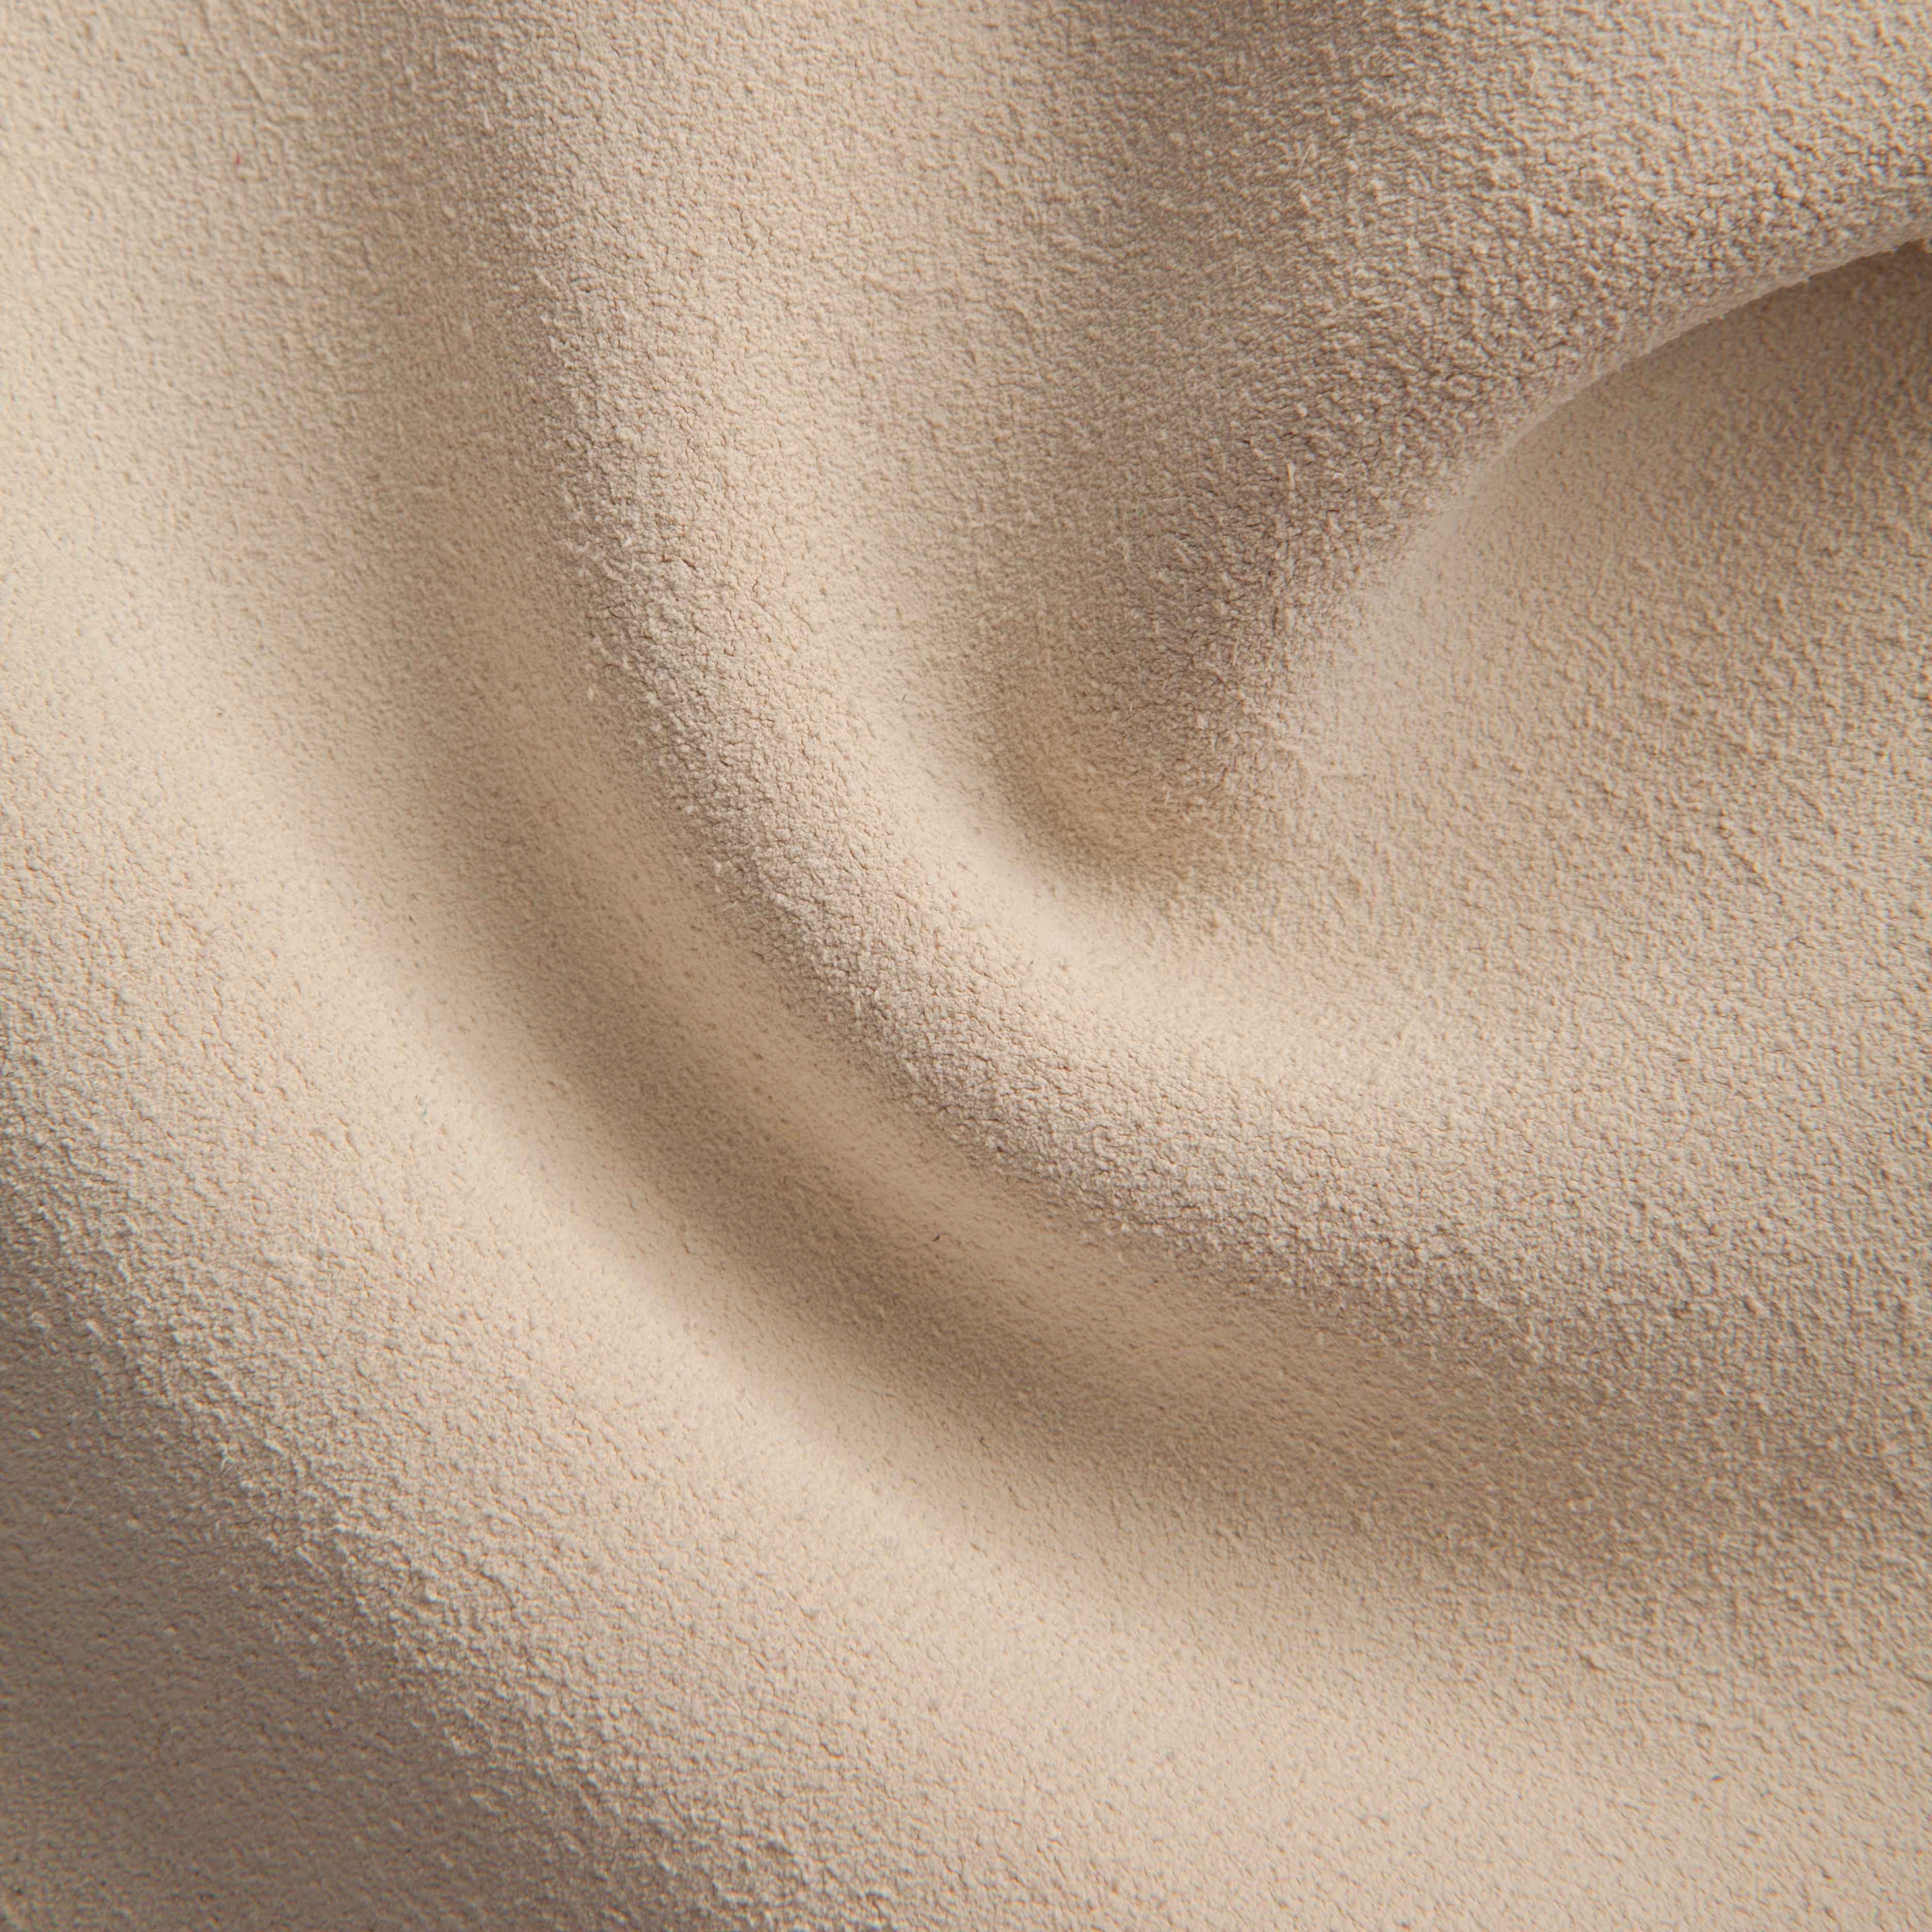 Satin Suede - Oyster